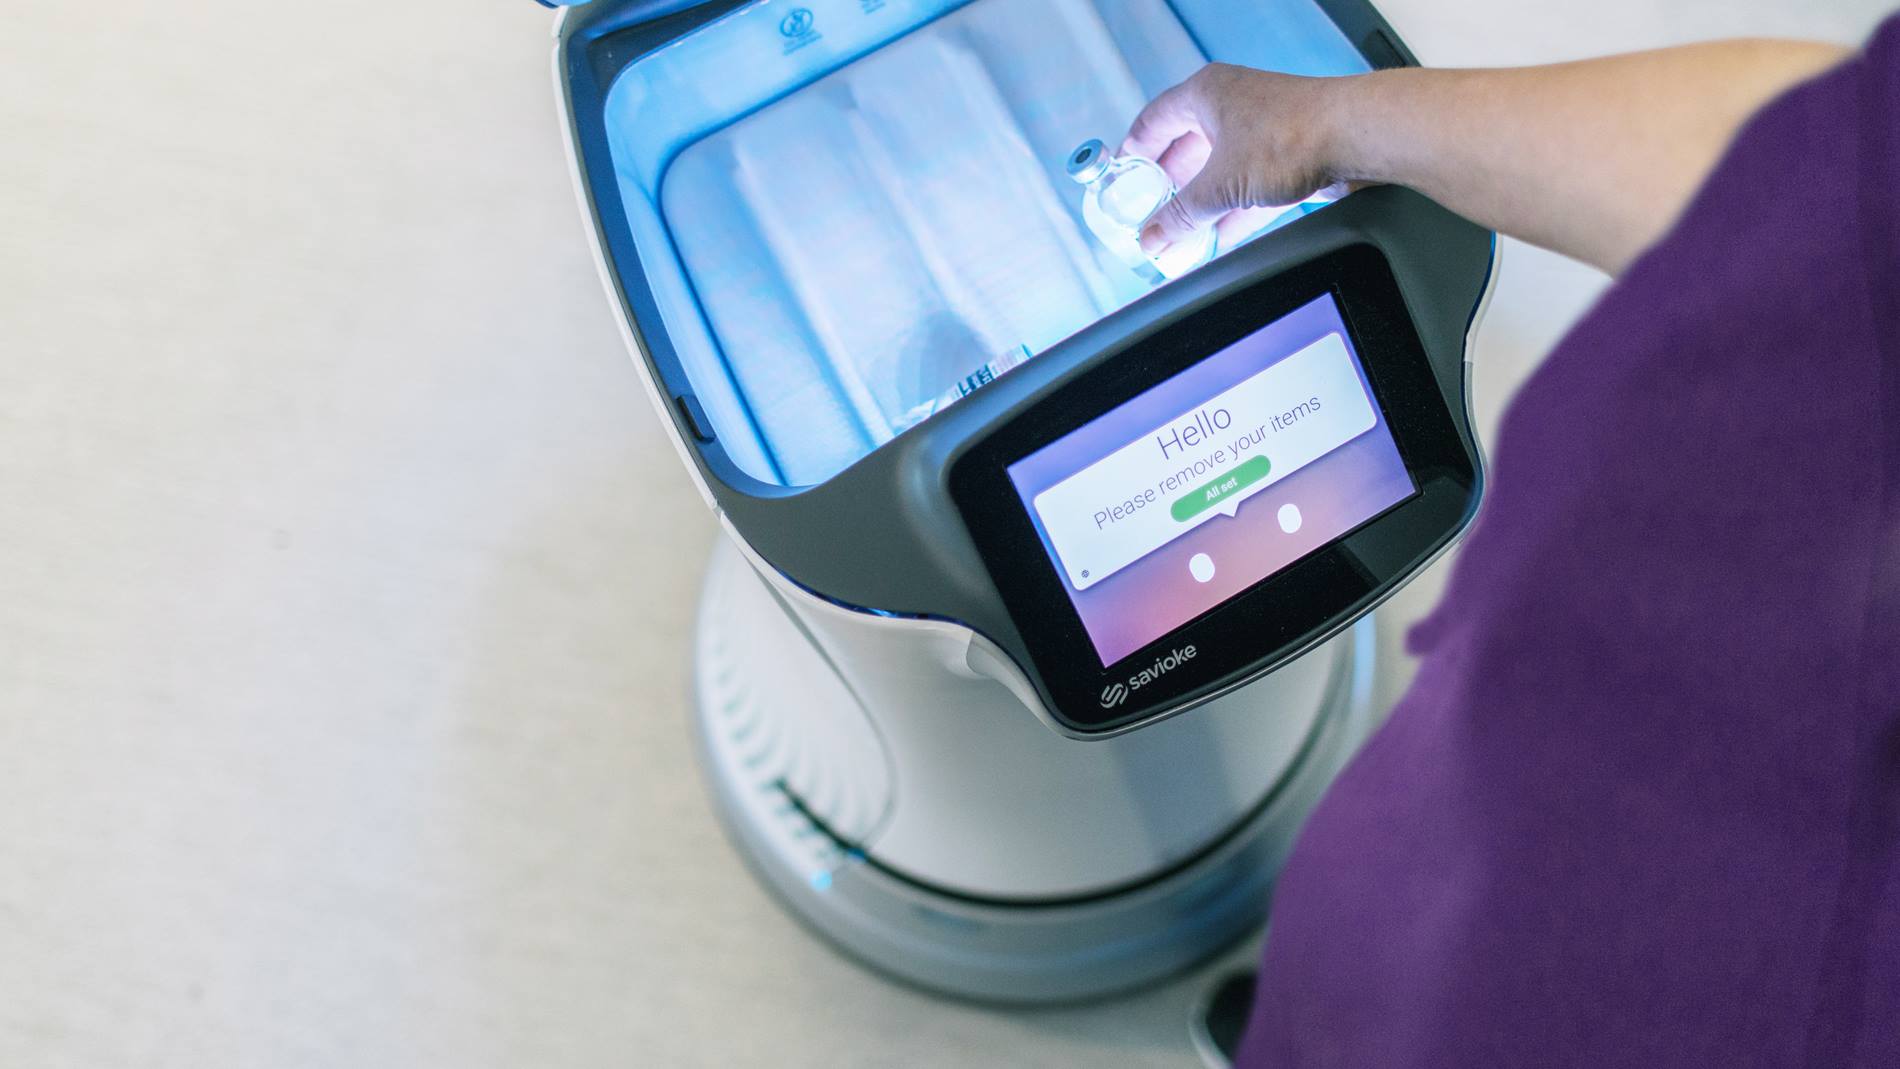 Relay® autonomous service robot is designed to work around people in busy hospitals. It transports medications, lab samples and other critical items, while navigating busy hallways and elevators.